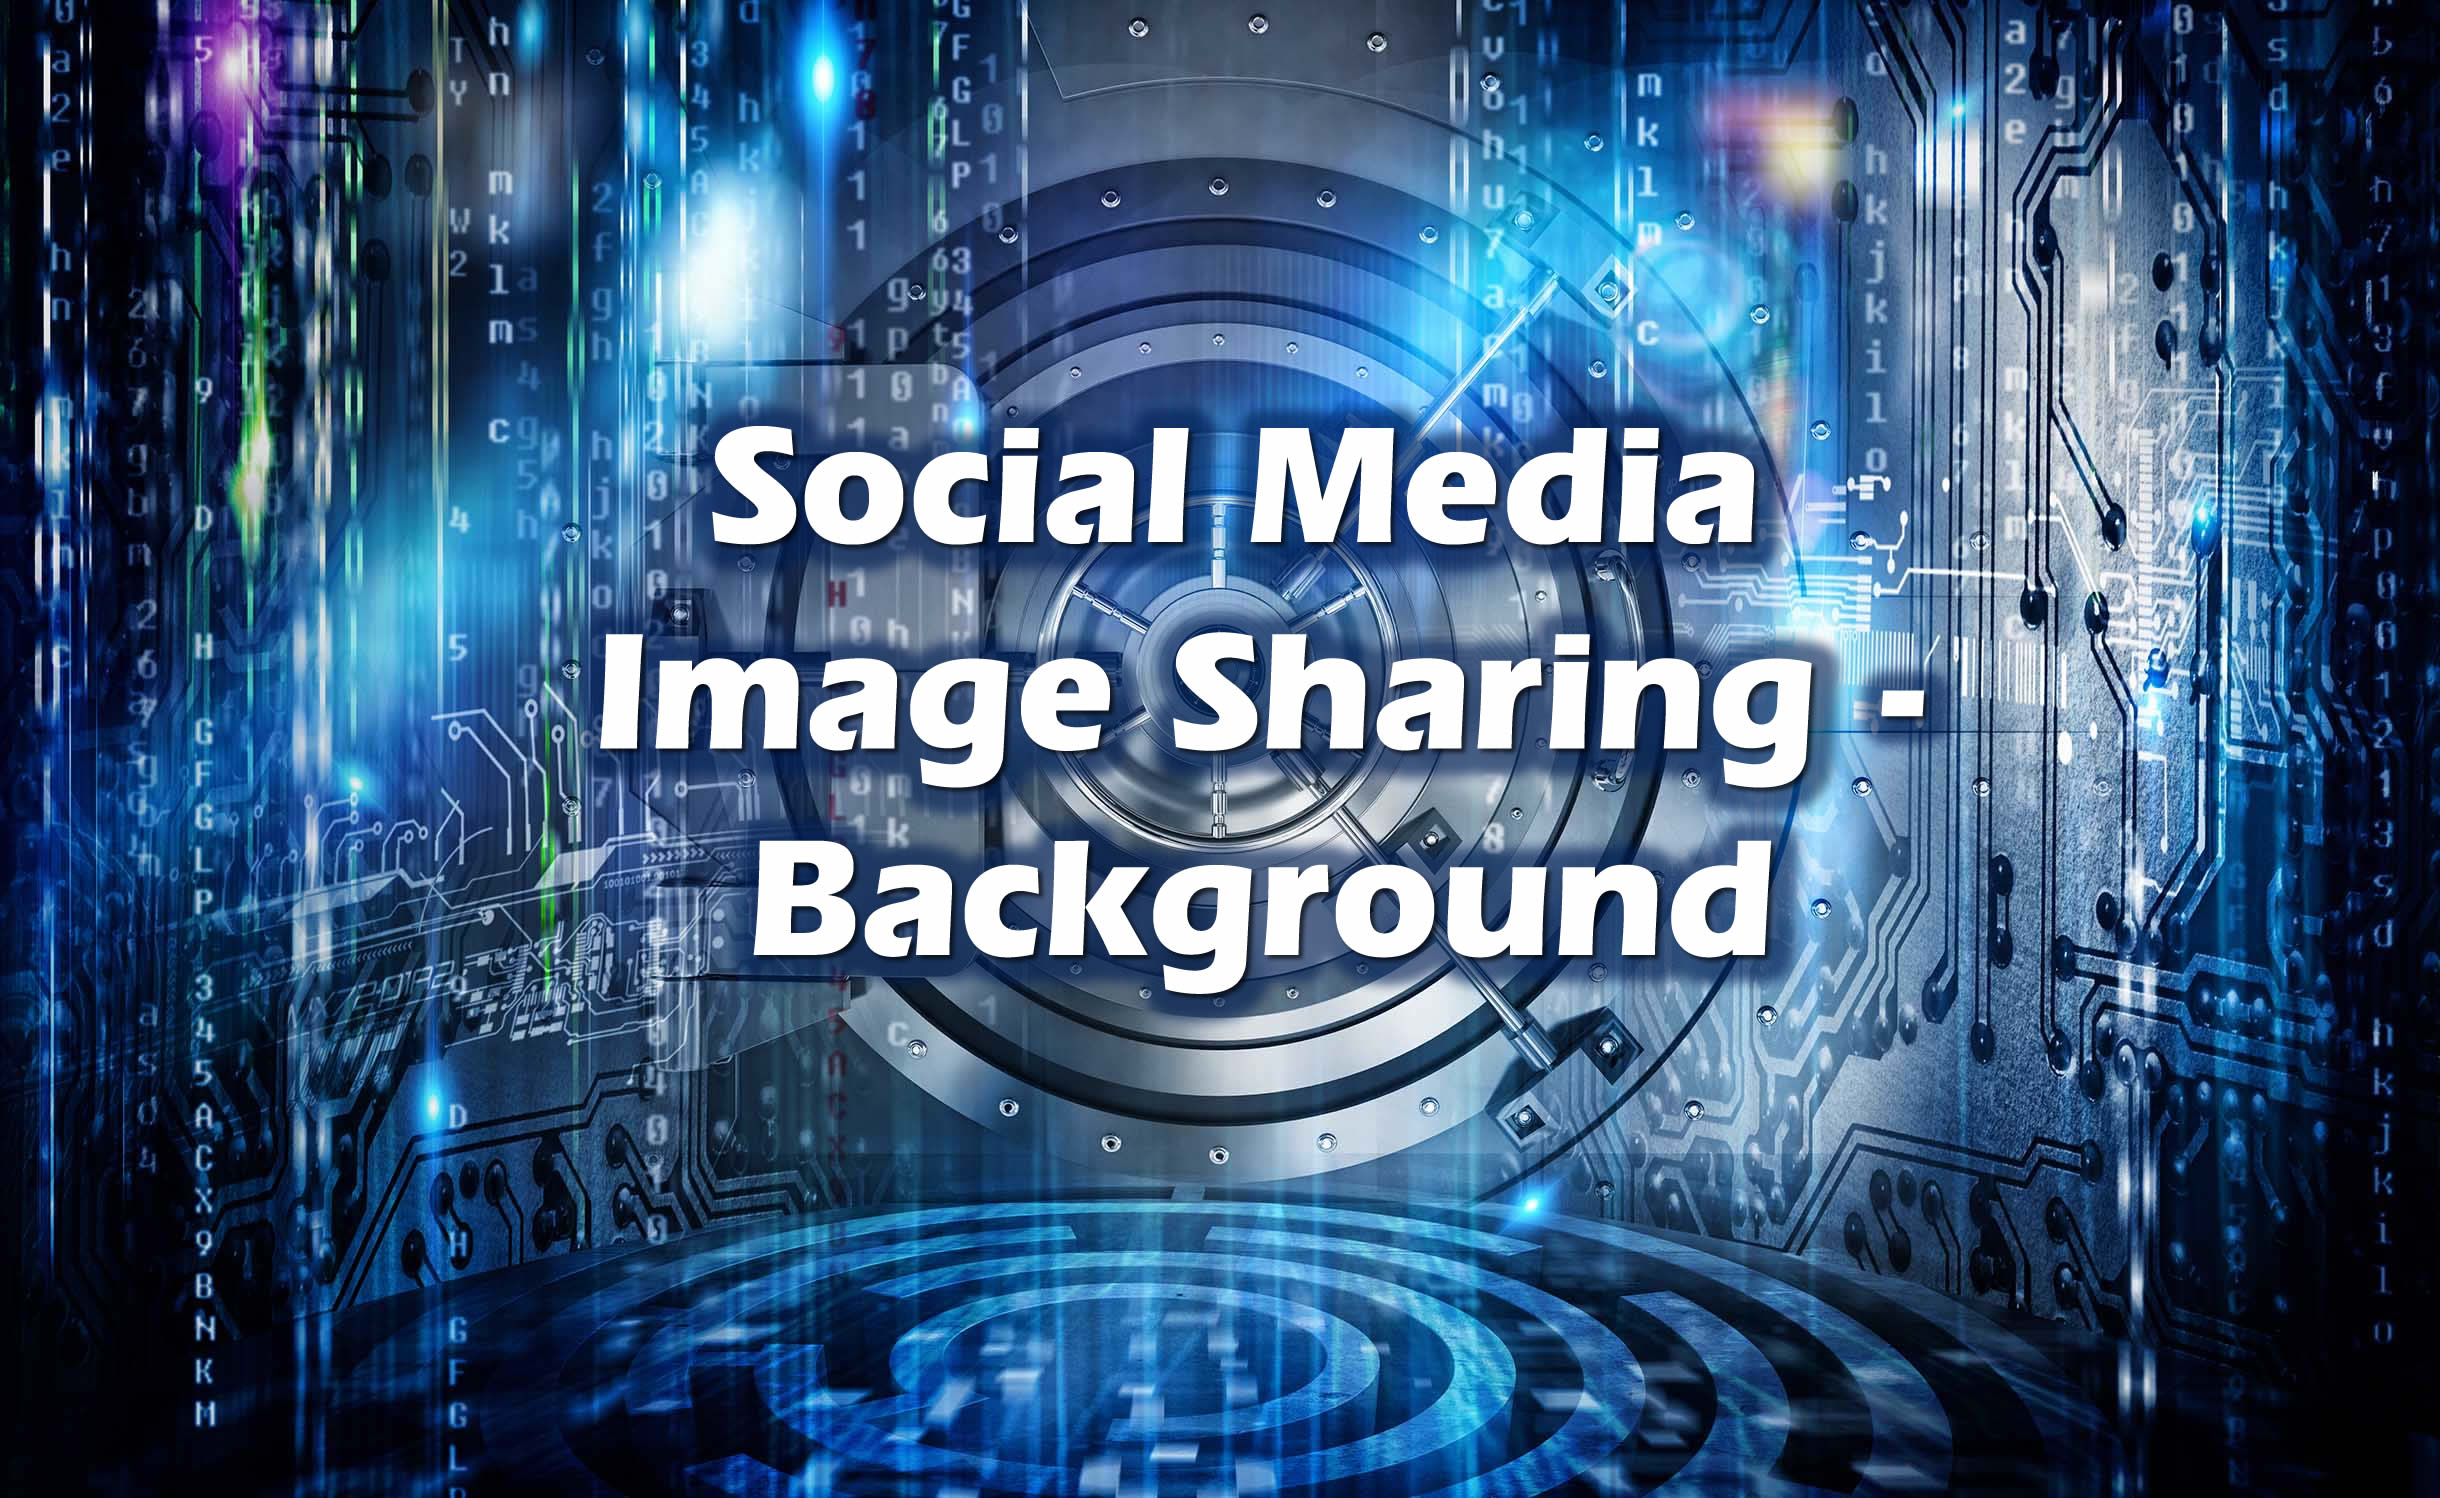 How to make the perfect social media sharing image - part 1 Background